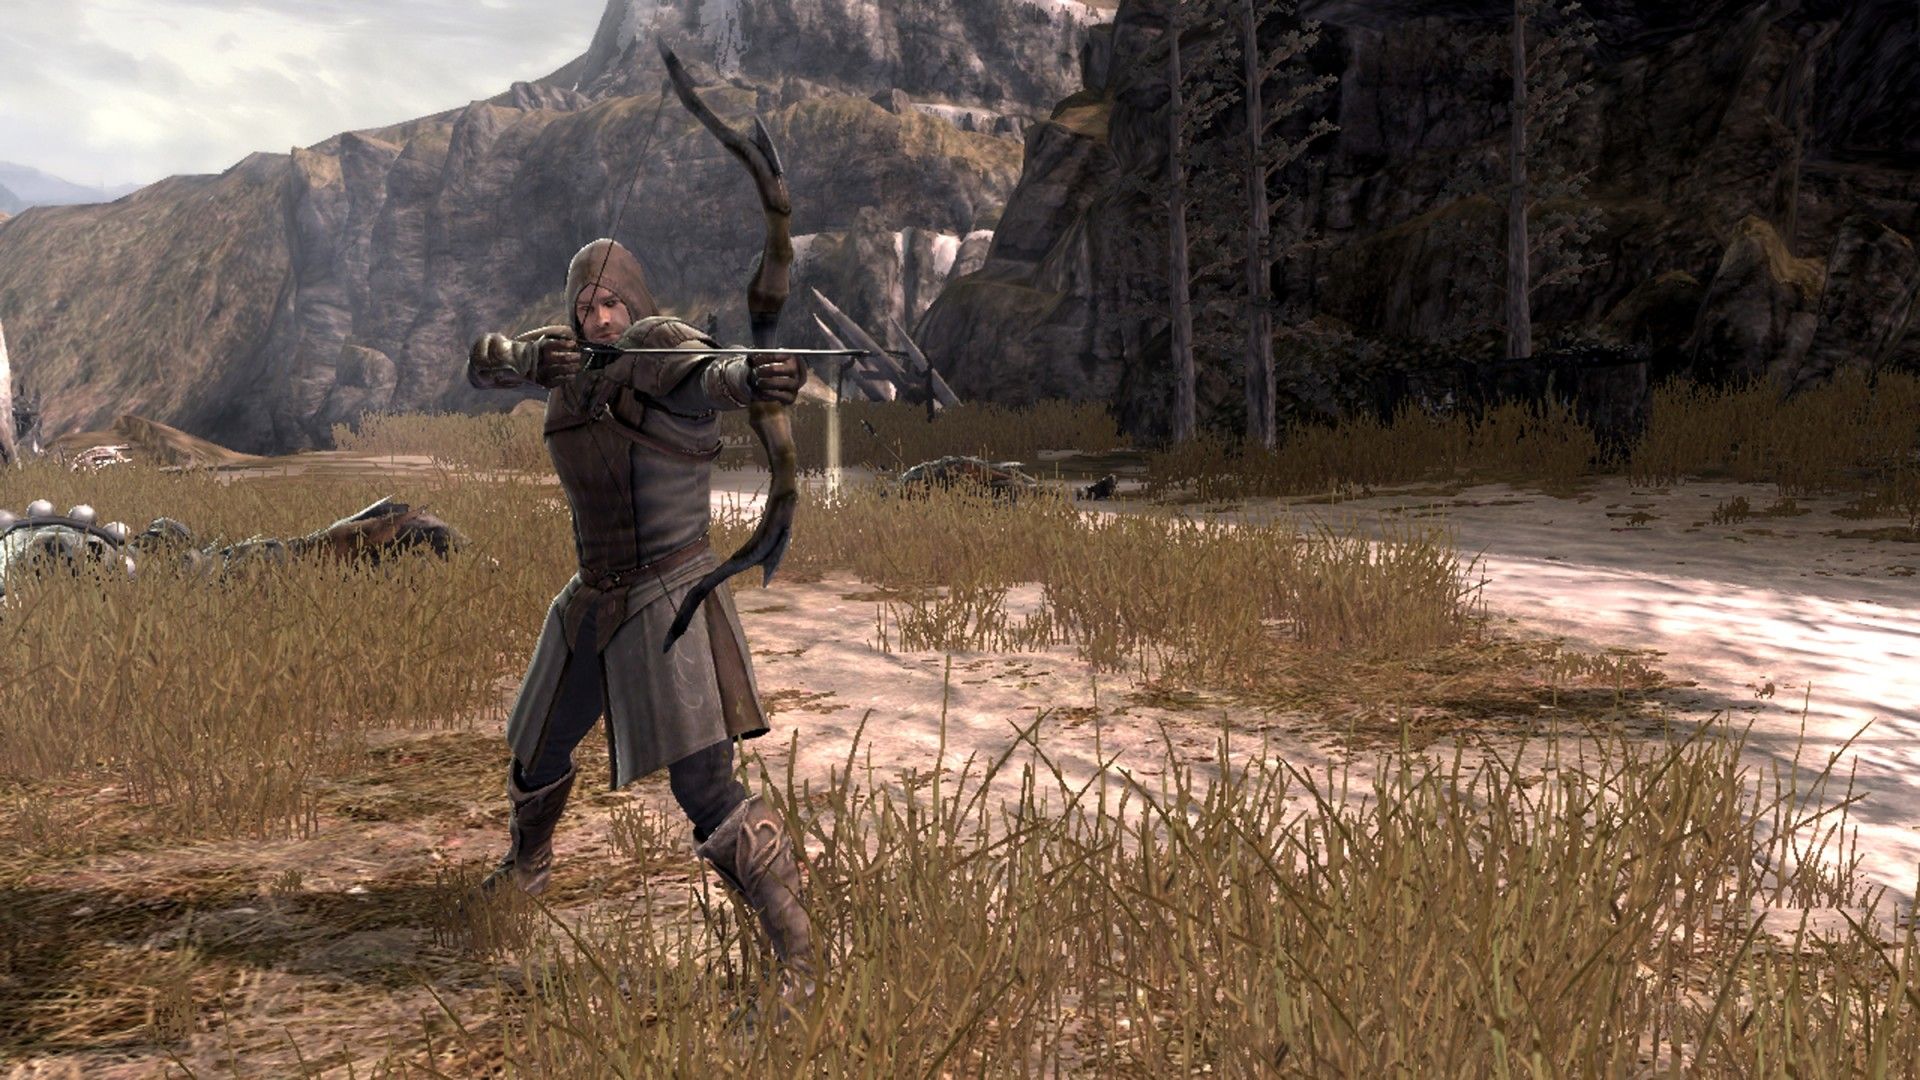 Lord of the Rings: War in the North Featured Screenshot #1